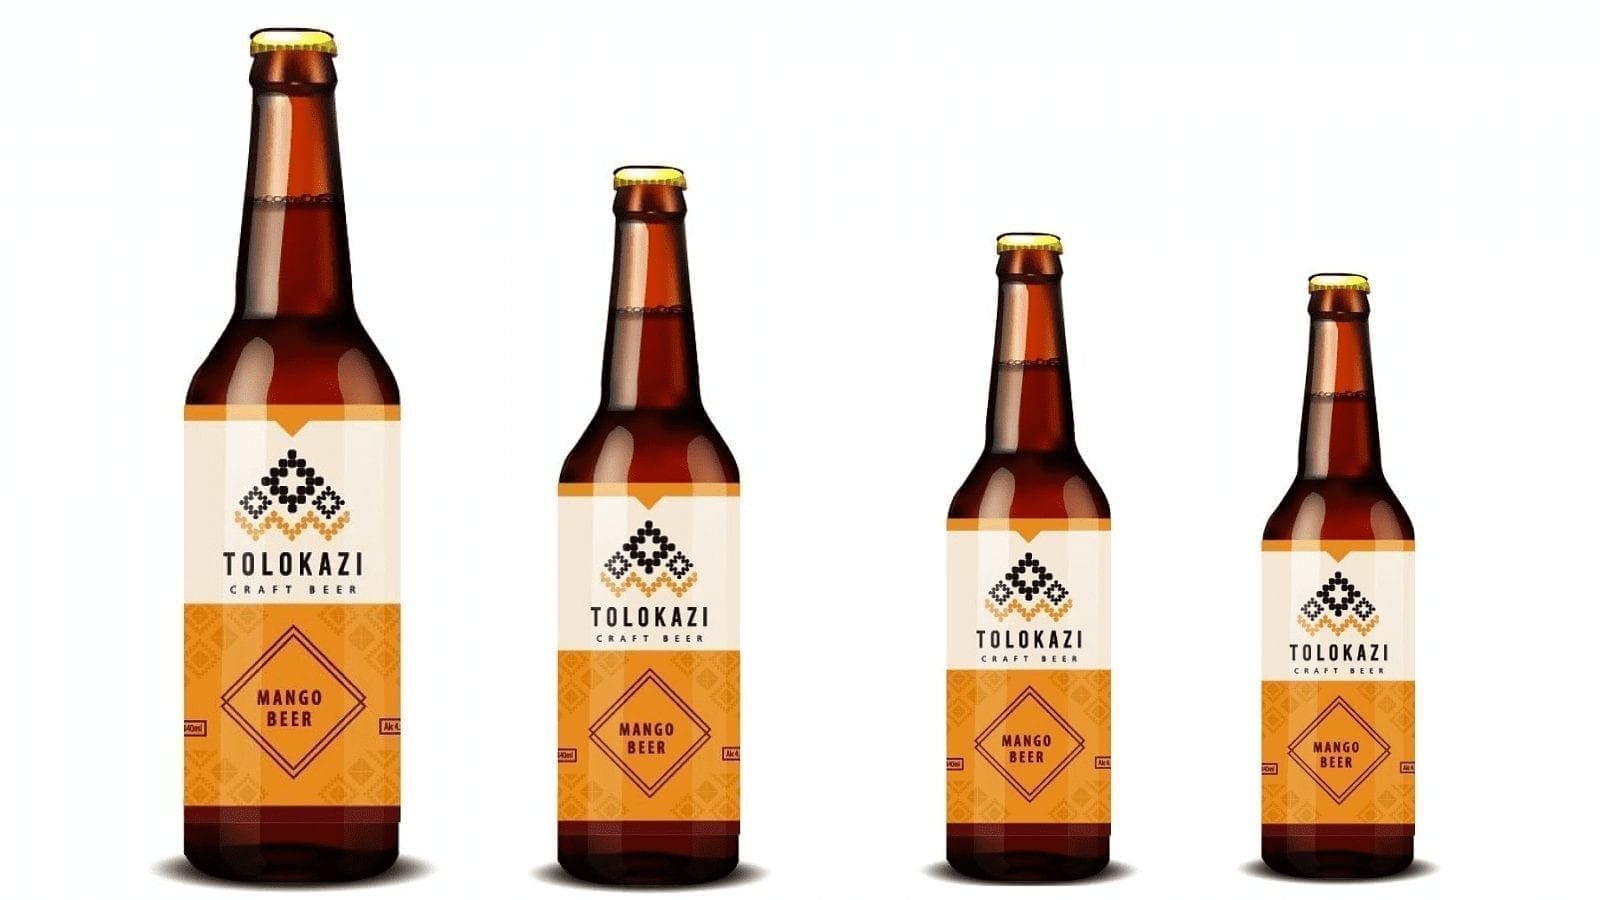 South African craft brewery Brewsters Craft launches limited edition of mango beer in celebration of women